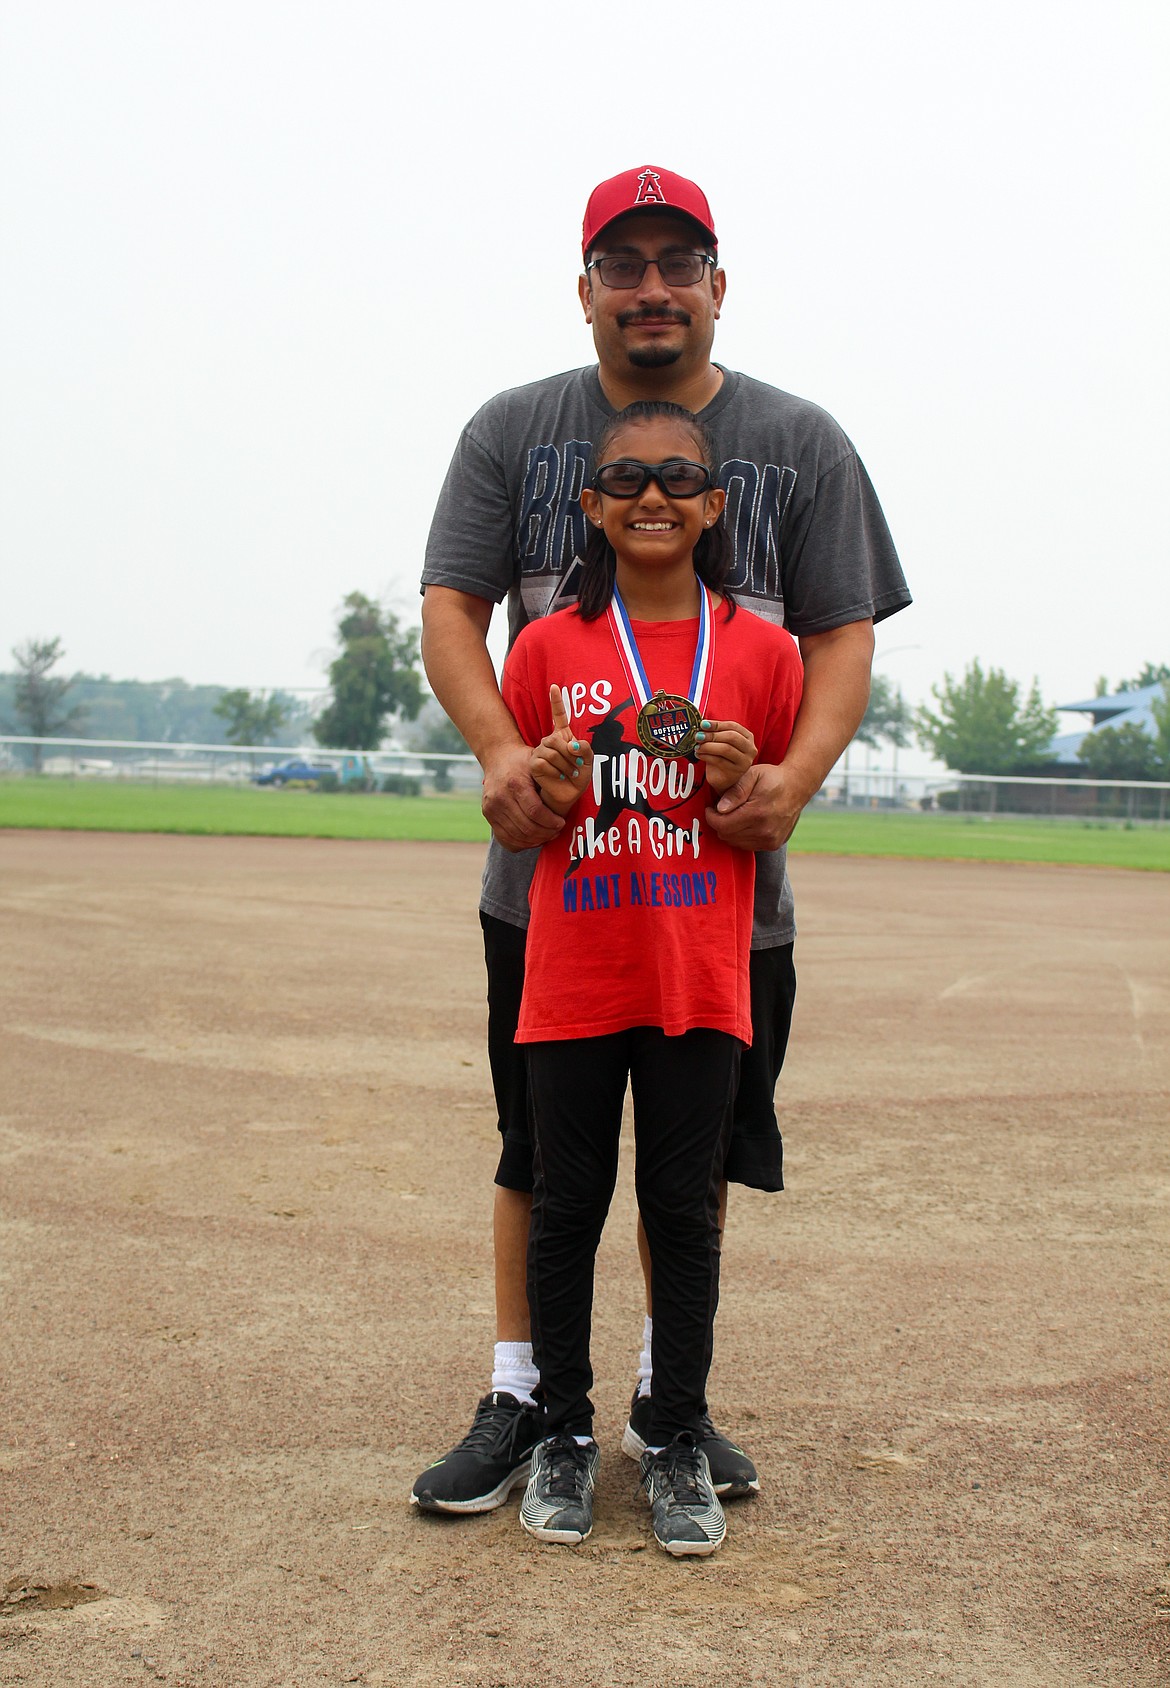 Mya Martinez and her dad, Ray Martinez, pose for a photo Sunday morning at Larsen Playfield in Moses Lake with Mya wearing her medal from the Class A 10U National Championship tournament in North Mankato, Minn.